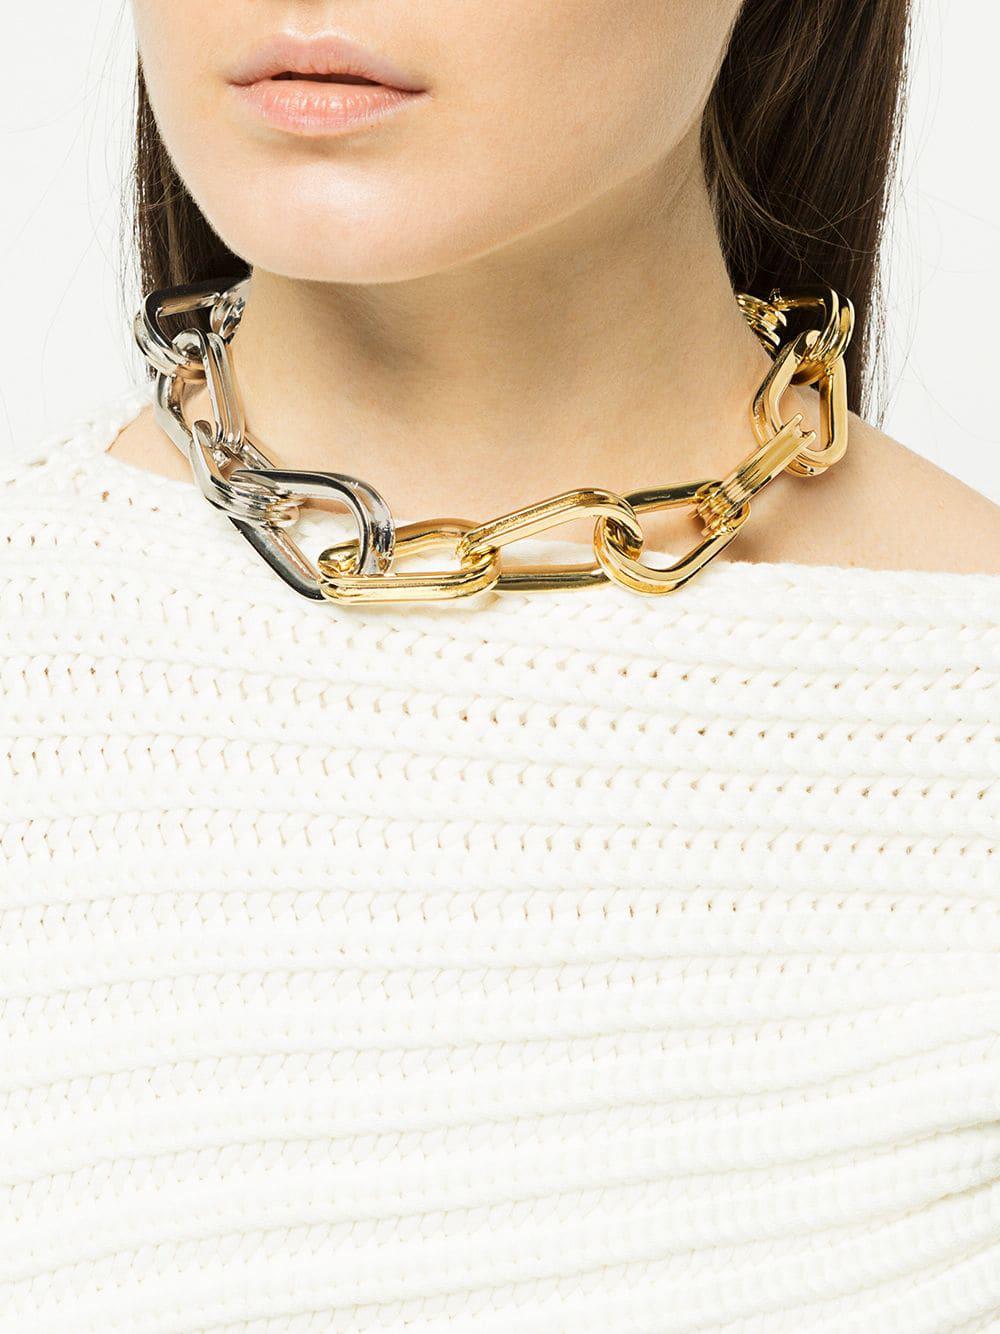 Annelise Michelson Chunky Chain Necklace in Gold (Metallic) - Lyst